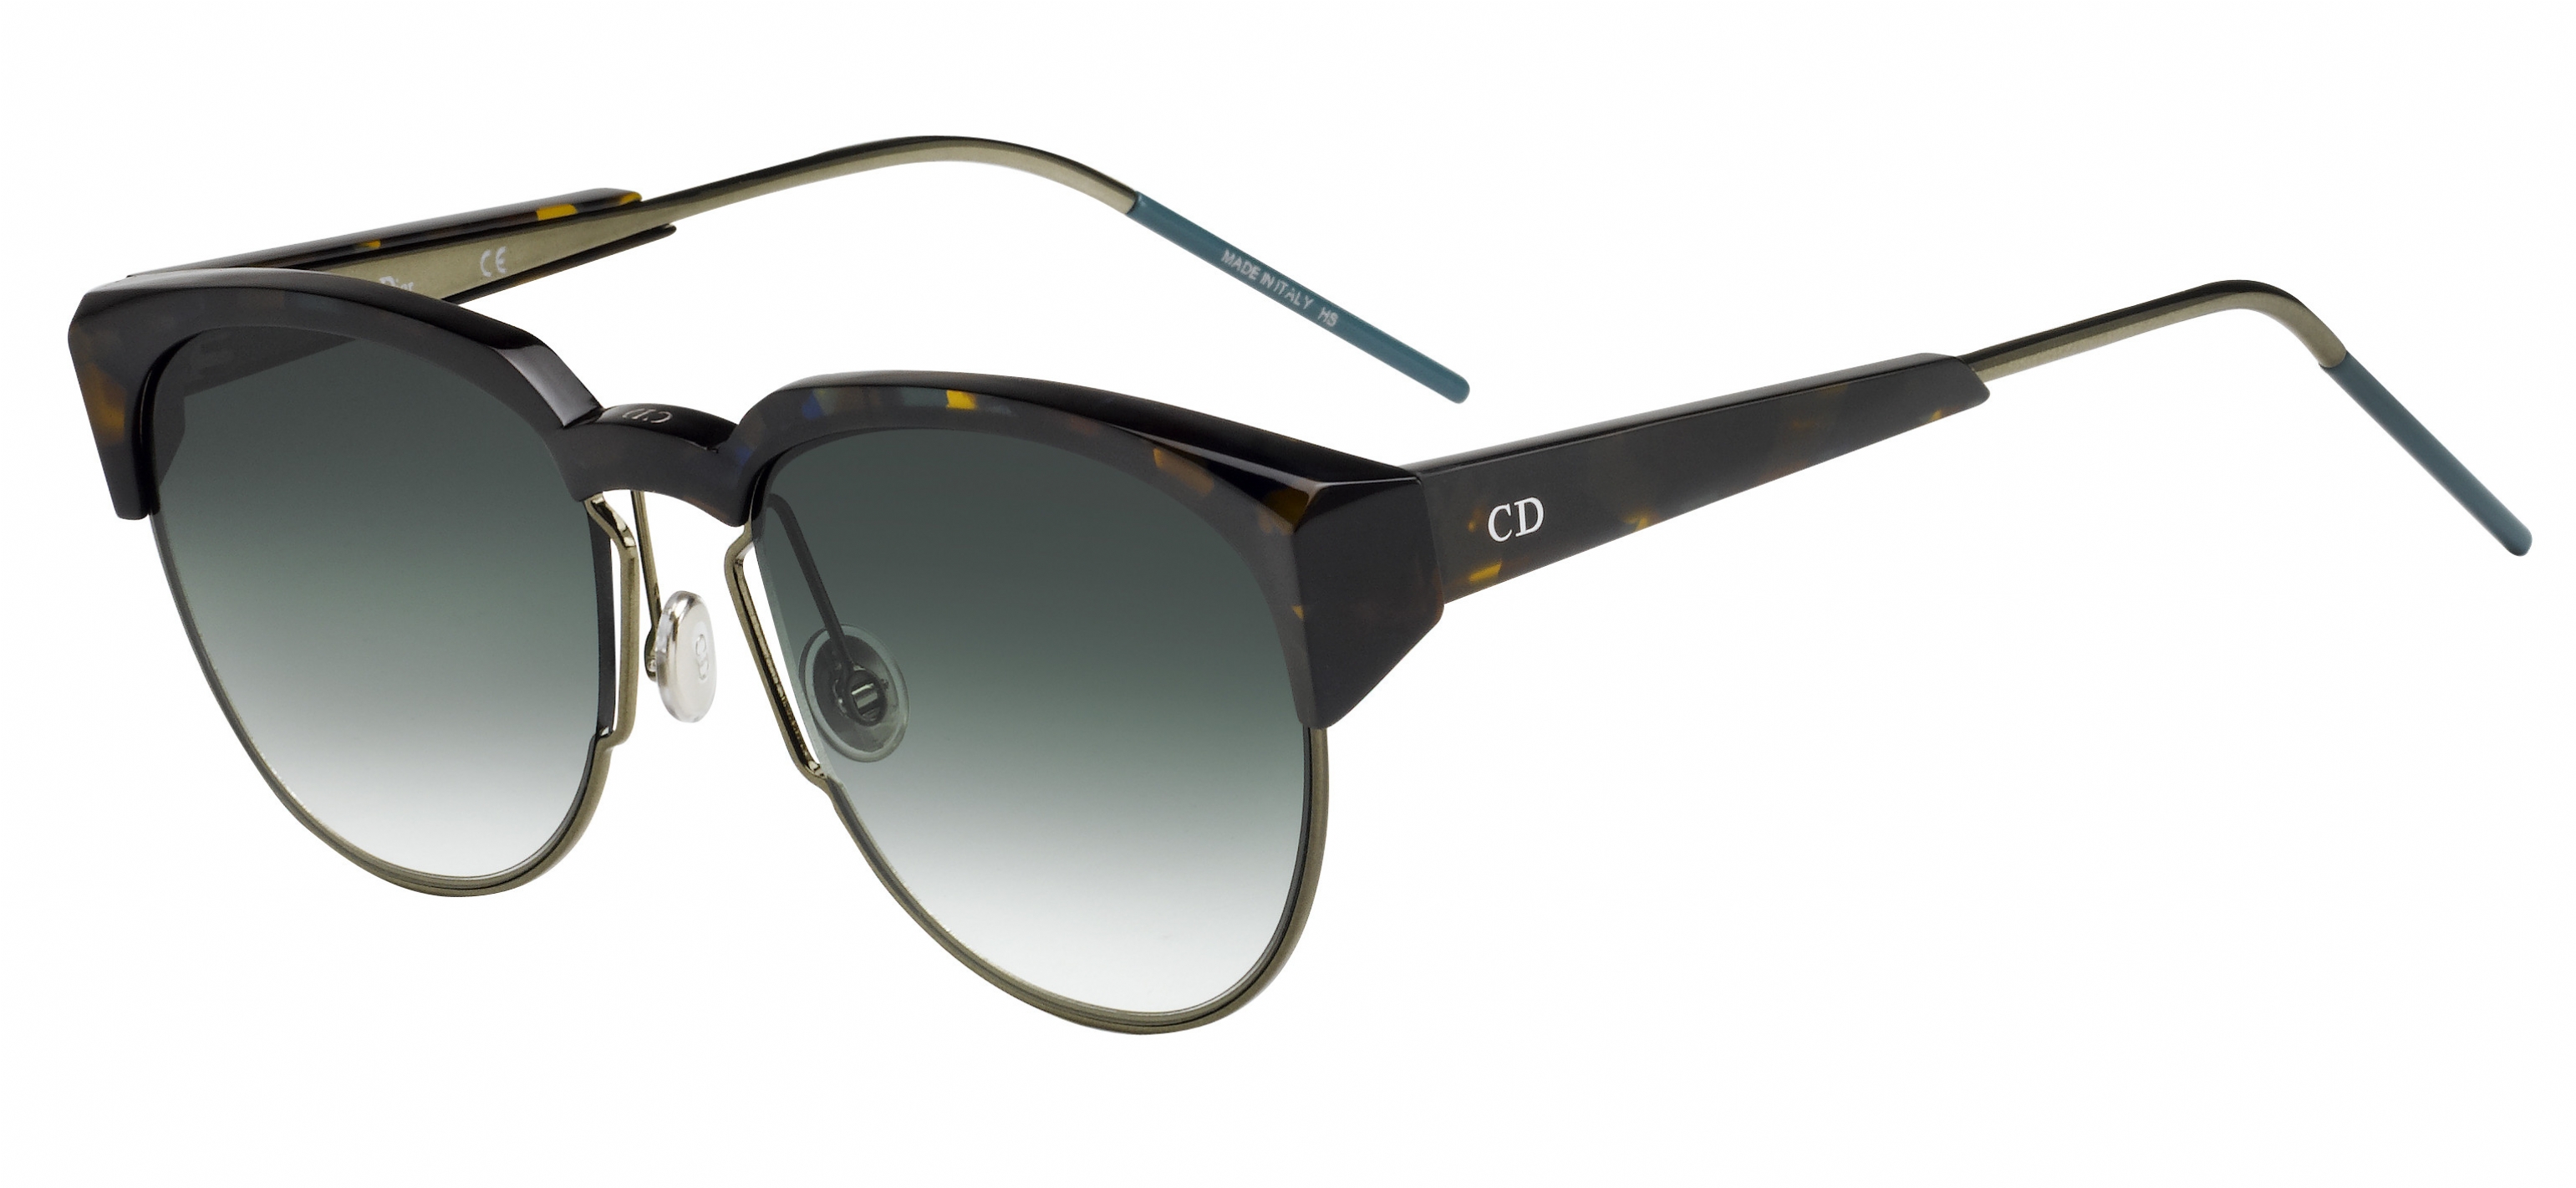 Buy Christian Dior Sunglasses directly from OpticsFast.com